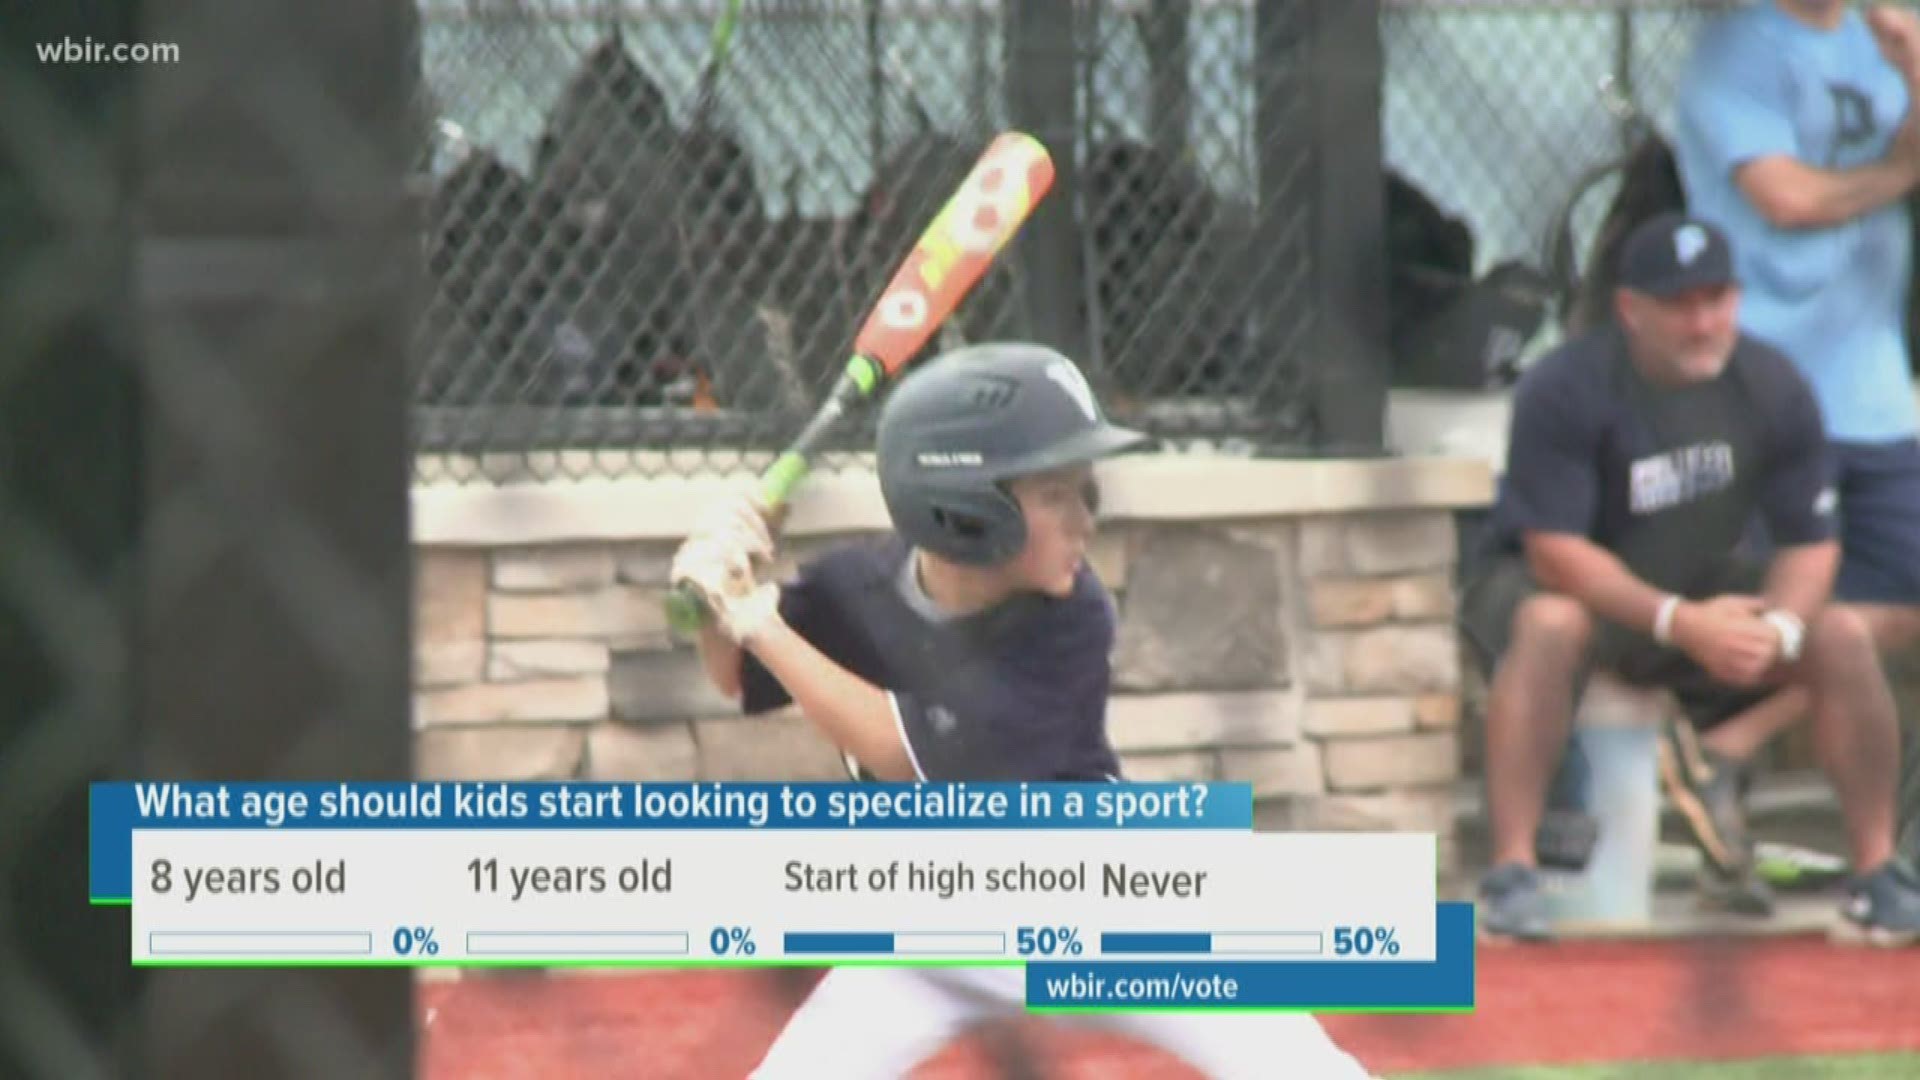 Many child athletes spend hours a day on the field and specialize in one sport. Knoxville parents and trainers say it's too much.